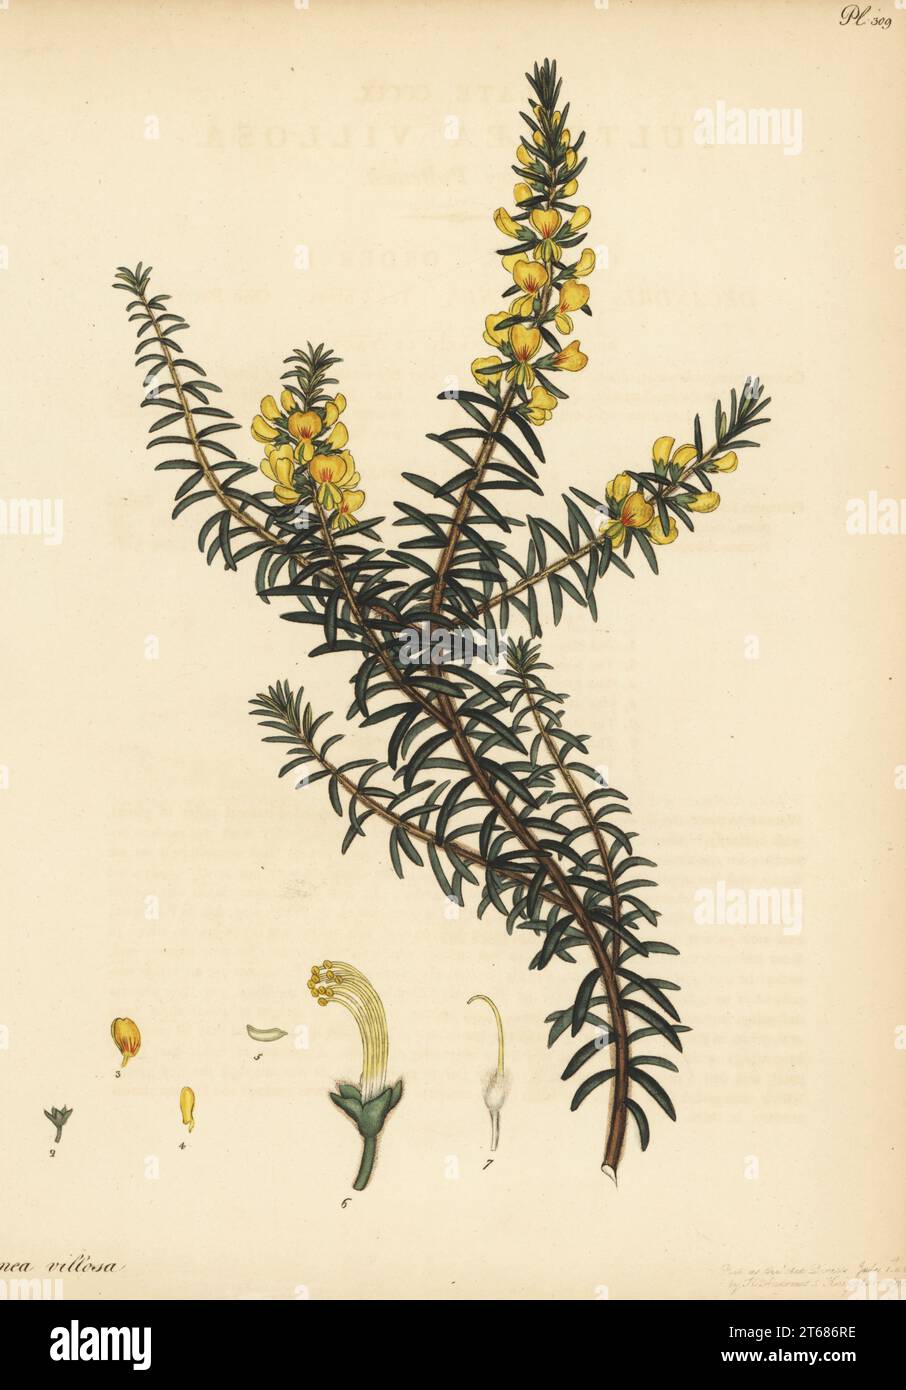 Hairy bush-pea or hairy pultenaea, Pultenaea villosa. From New Holland, Australia, in the Hammersmith Nursery of Lee and Kennedy. Copperplate engraving drawn, engraved and hand-coloured by Henry Andrews from his Botanical Register, Volume 5, self-published in Knightsbridge, London, 1803. Stock Photo